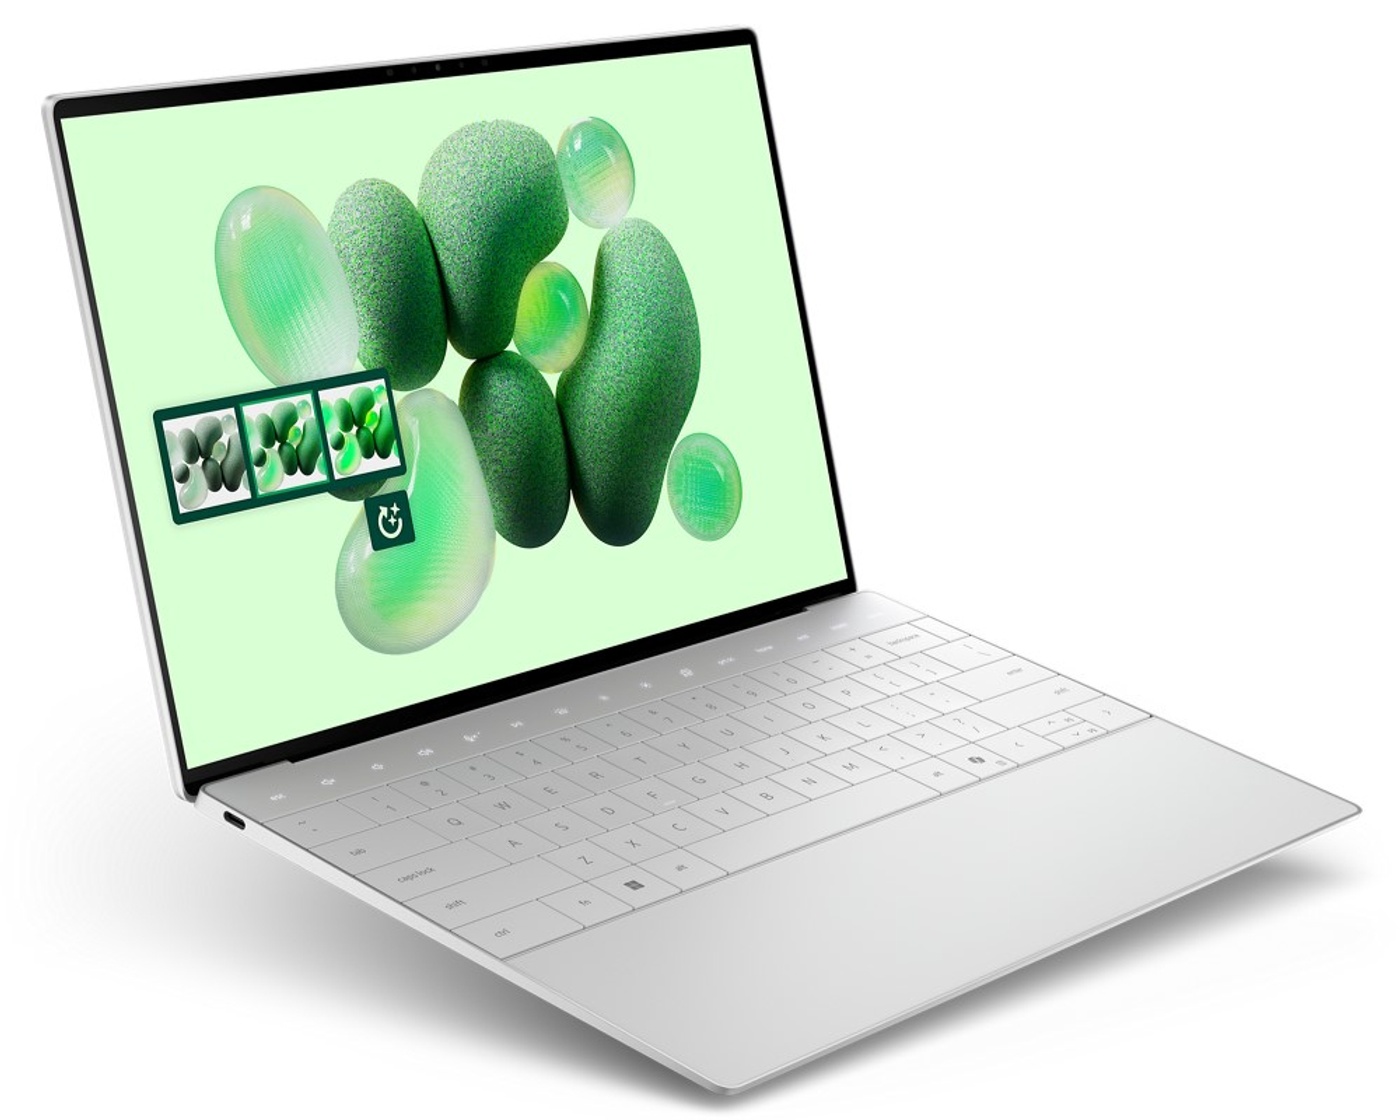 Snapdragon Processor Laptops from Microsoft and Dell